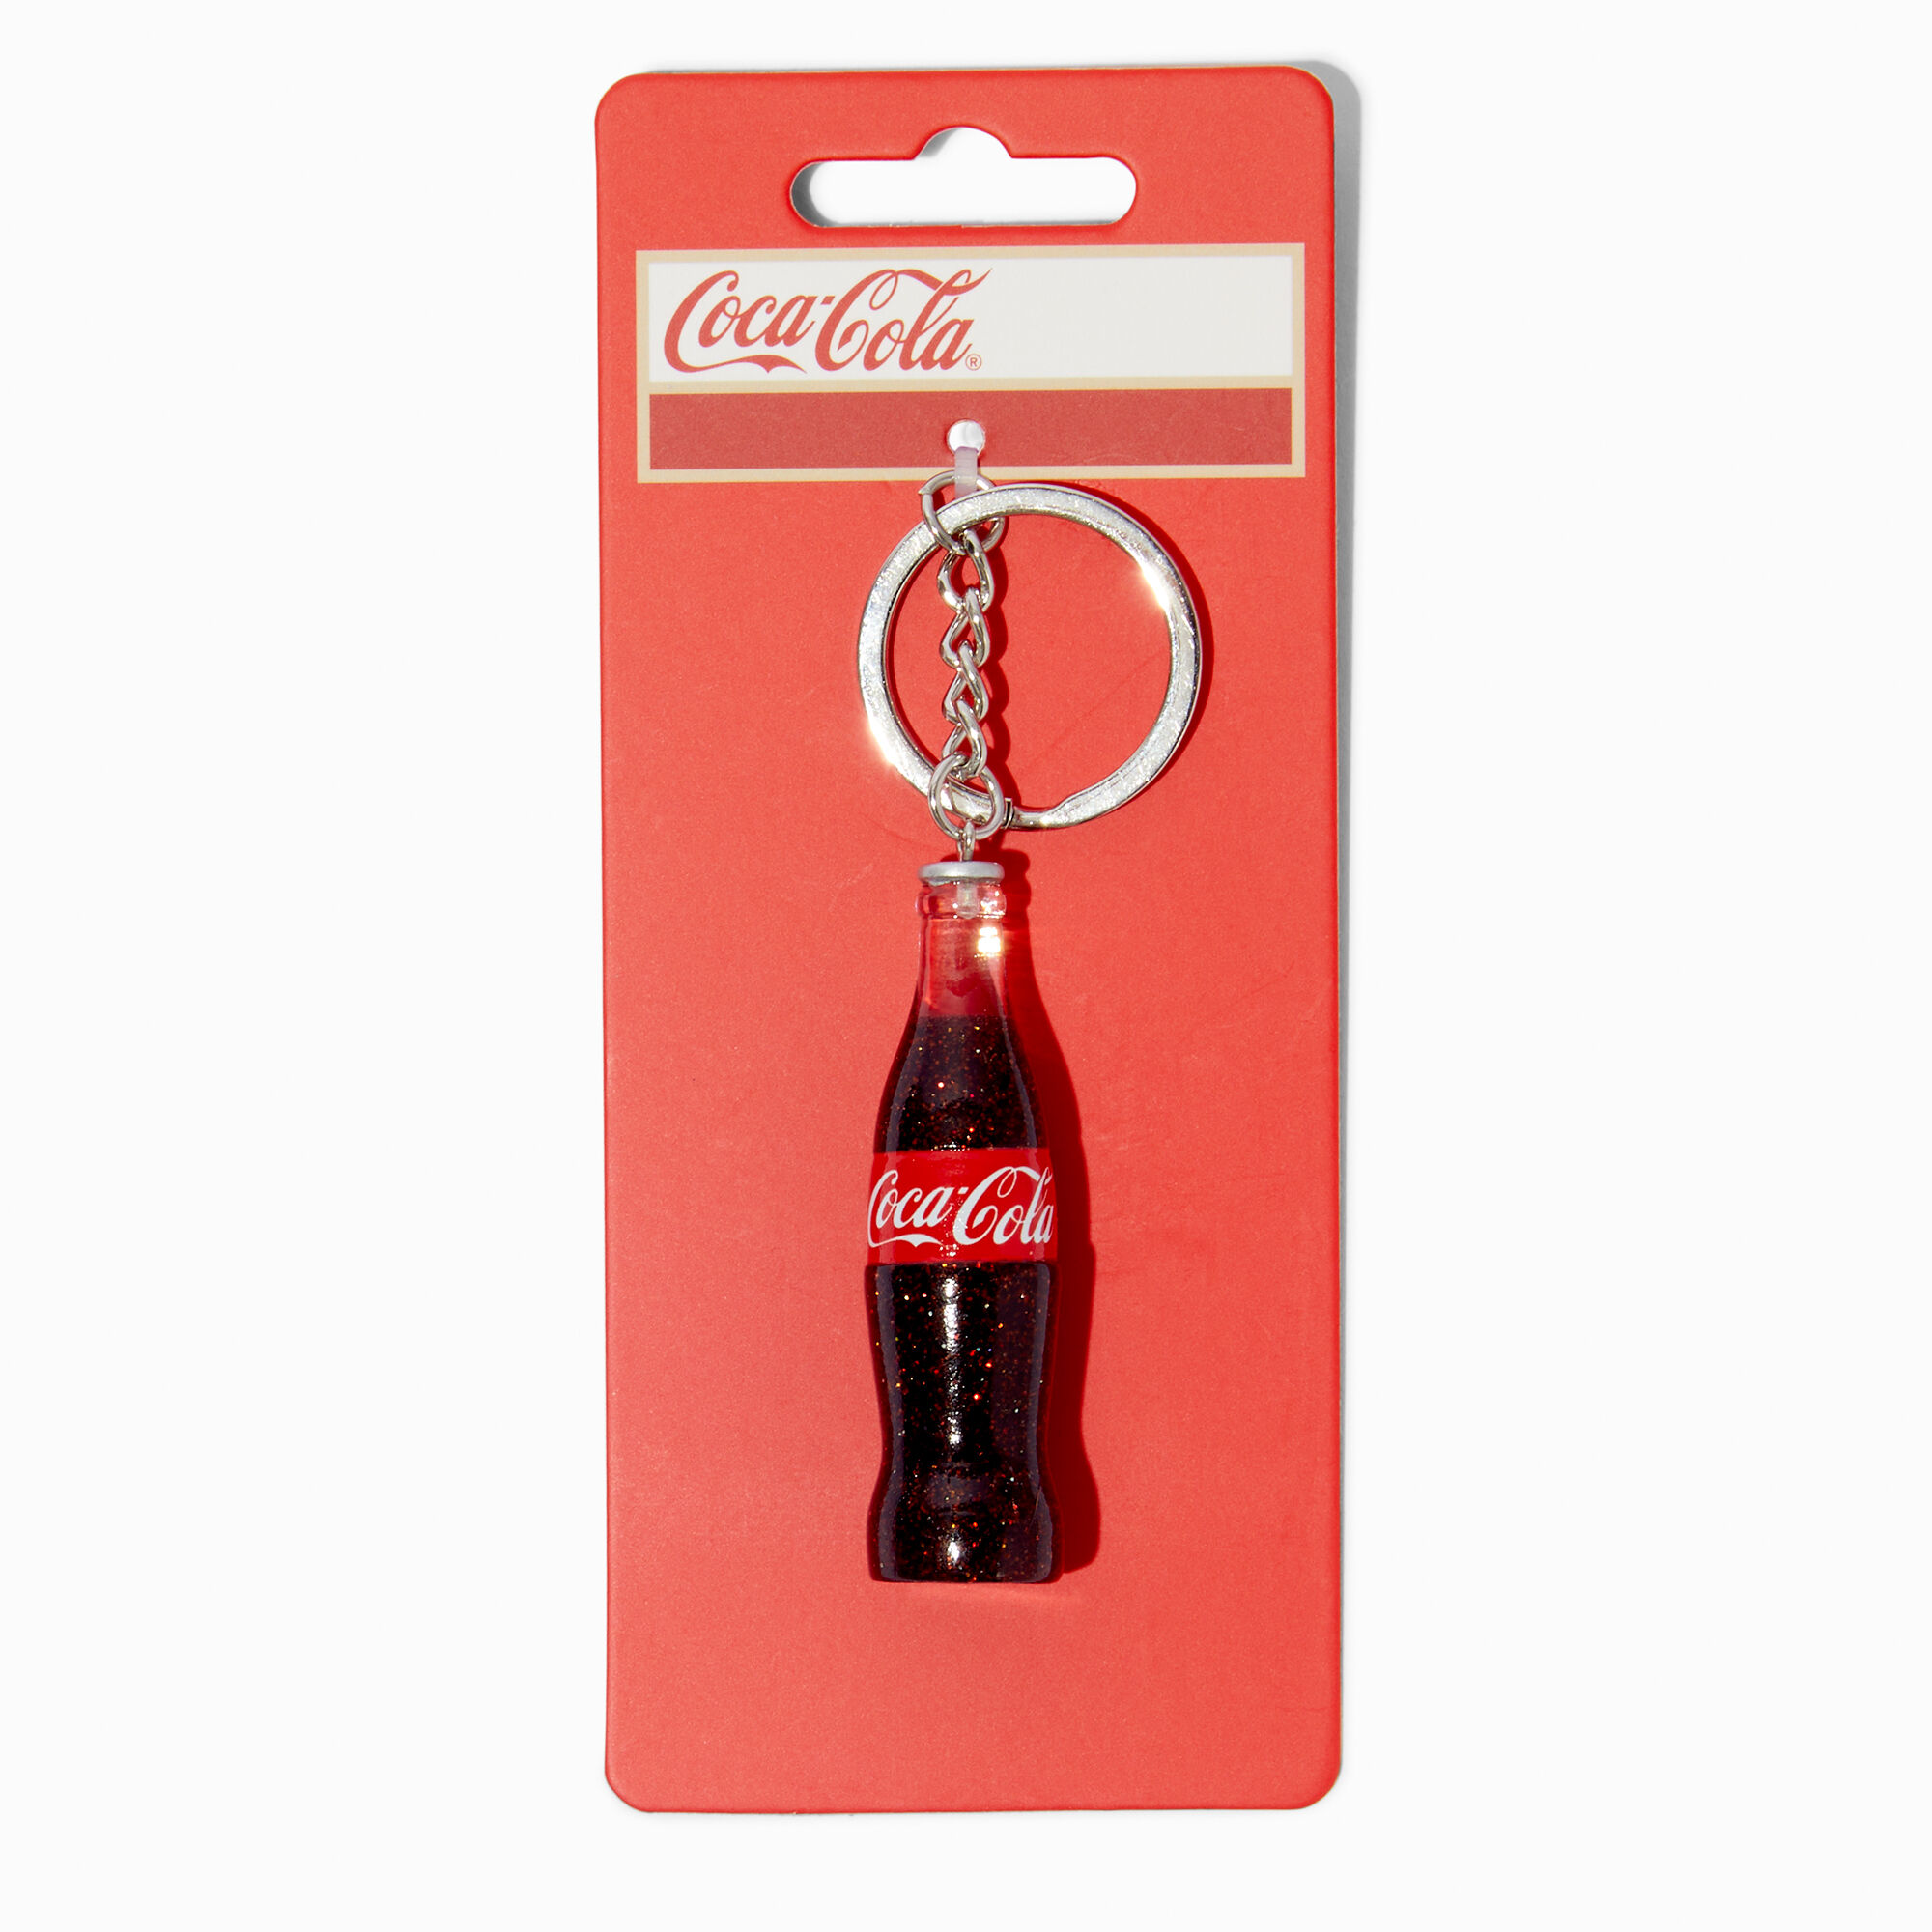 View Claires CocaCola Bottle Keyring information